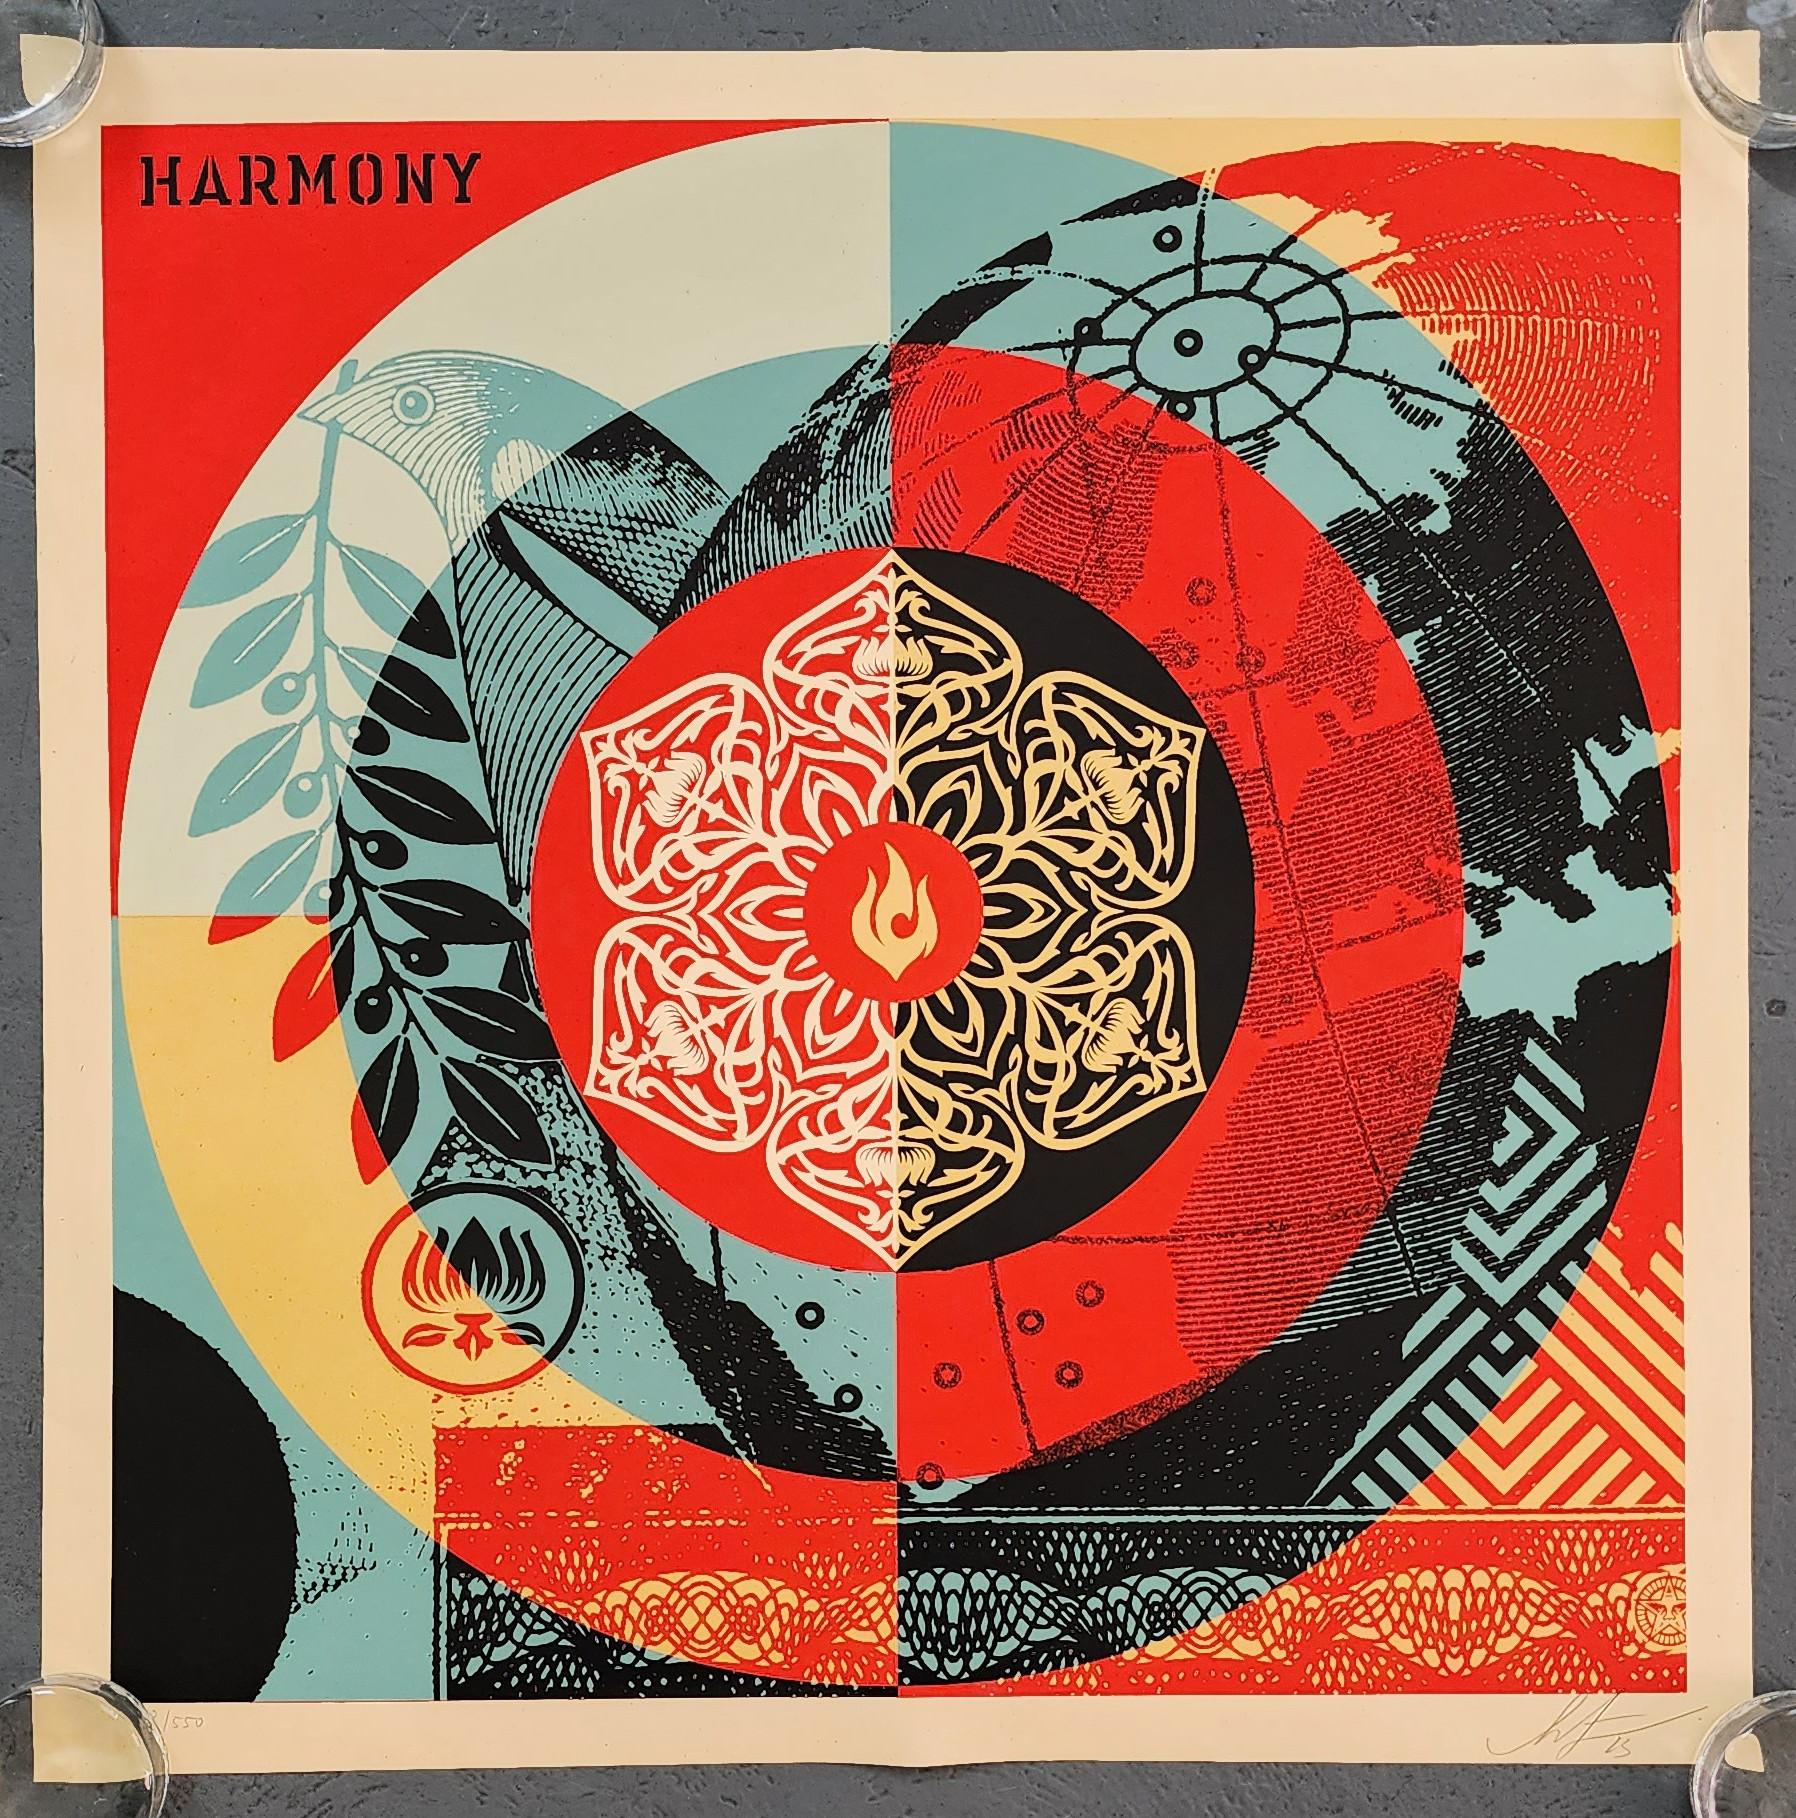 Global Harmony (Mandala, Harmony, Wholeness, Unified Global Perspective) - Contemporary Print by Shepard Fairey